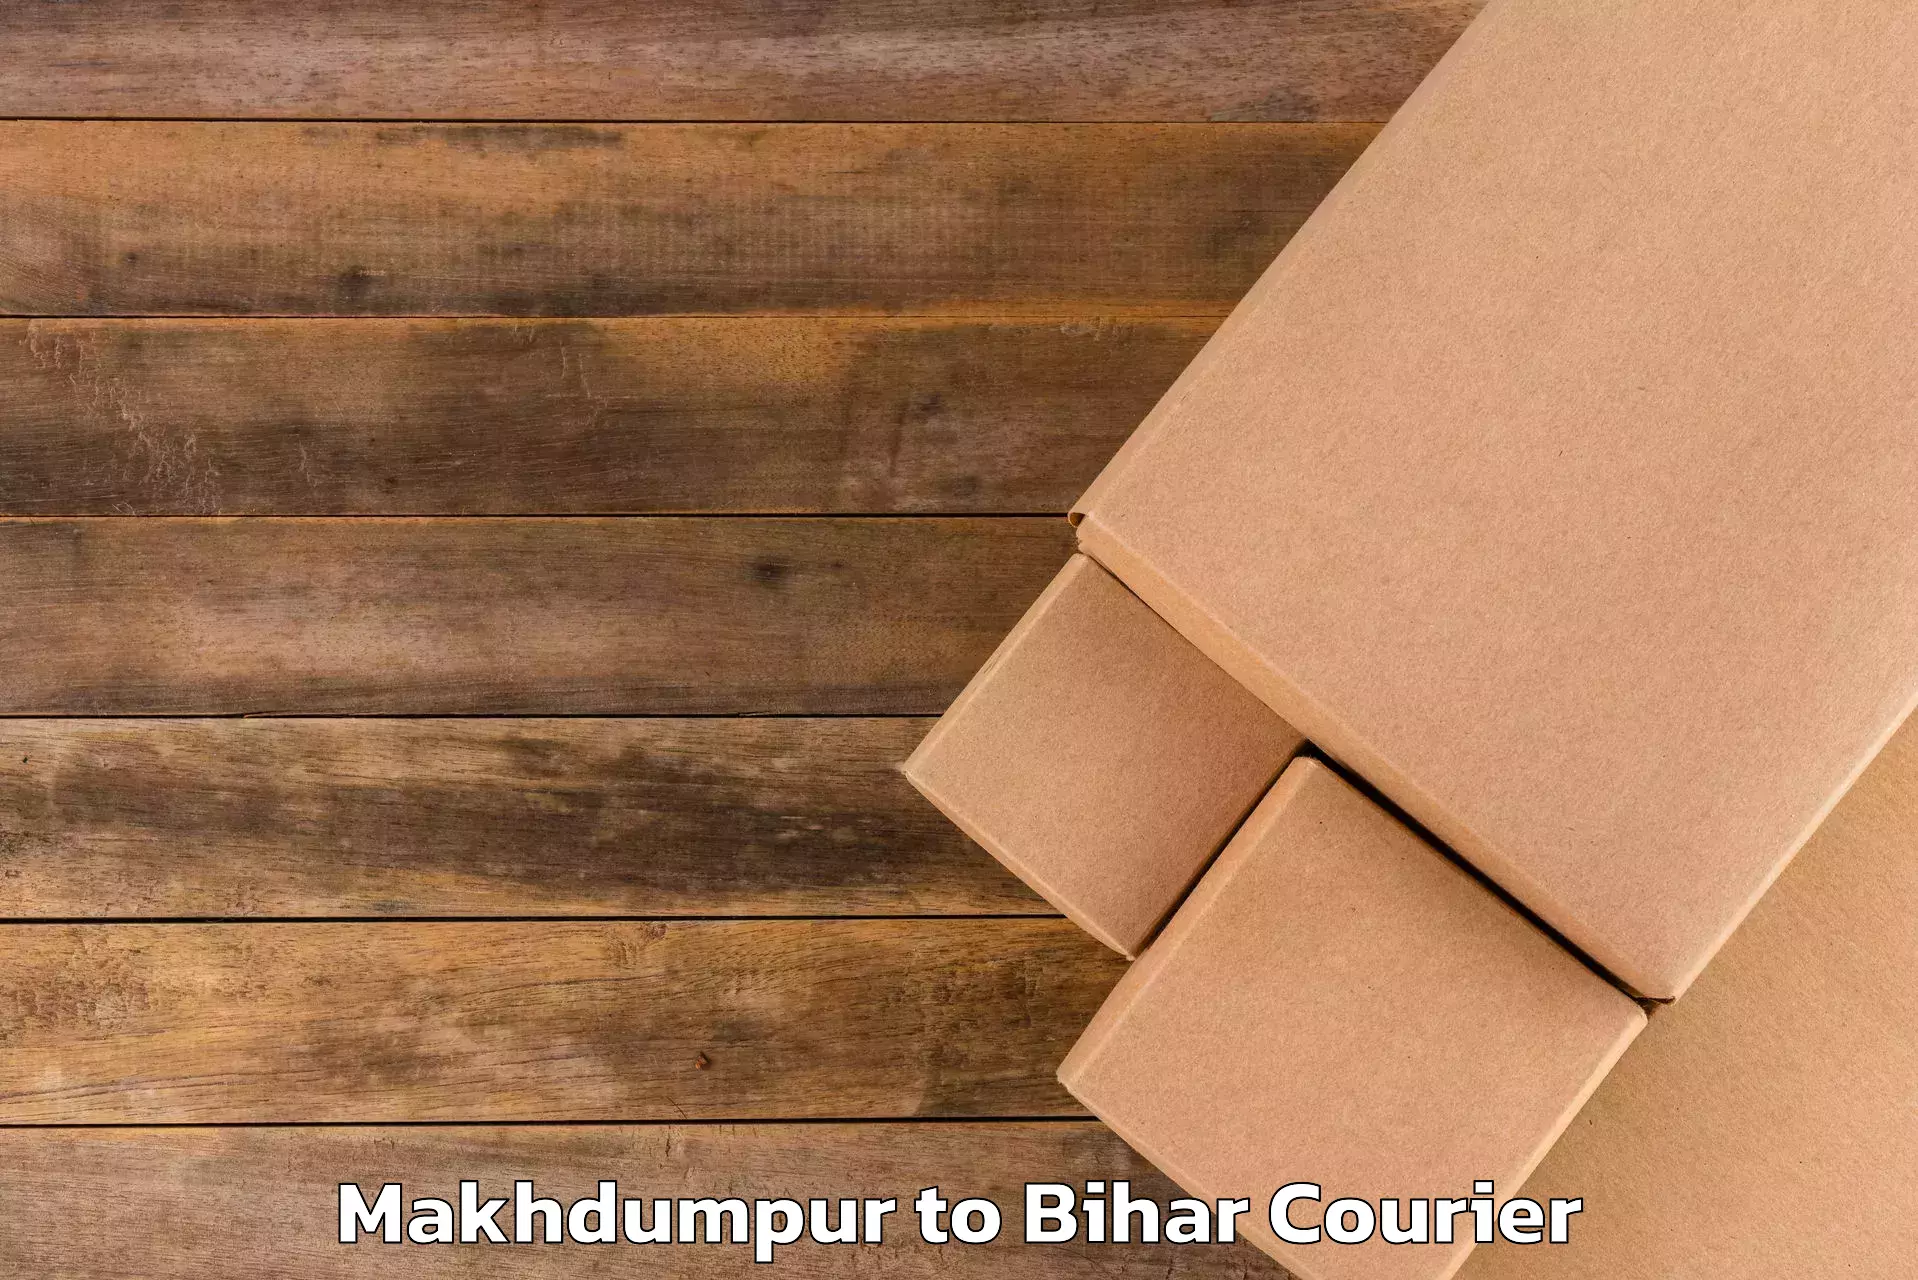 Luggage shipping planner in Makhdumpur to Maheshkhunt